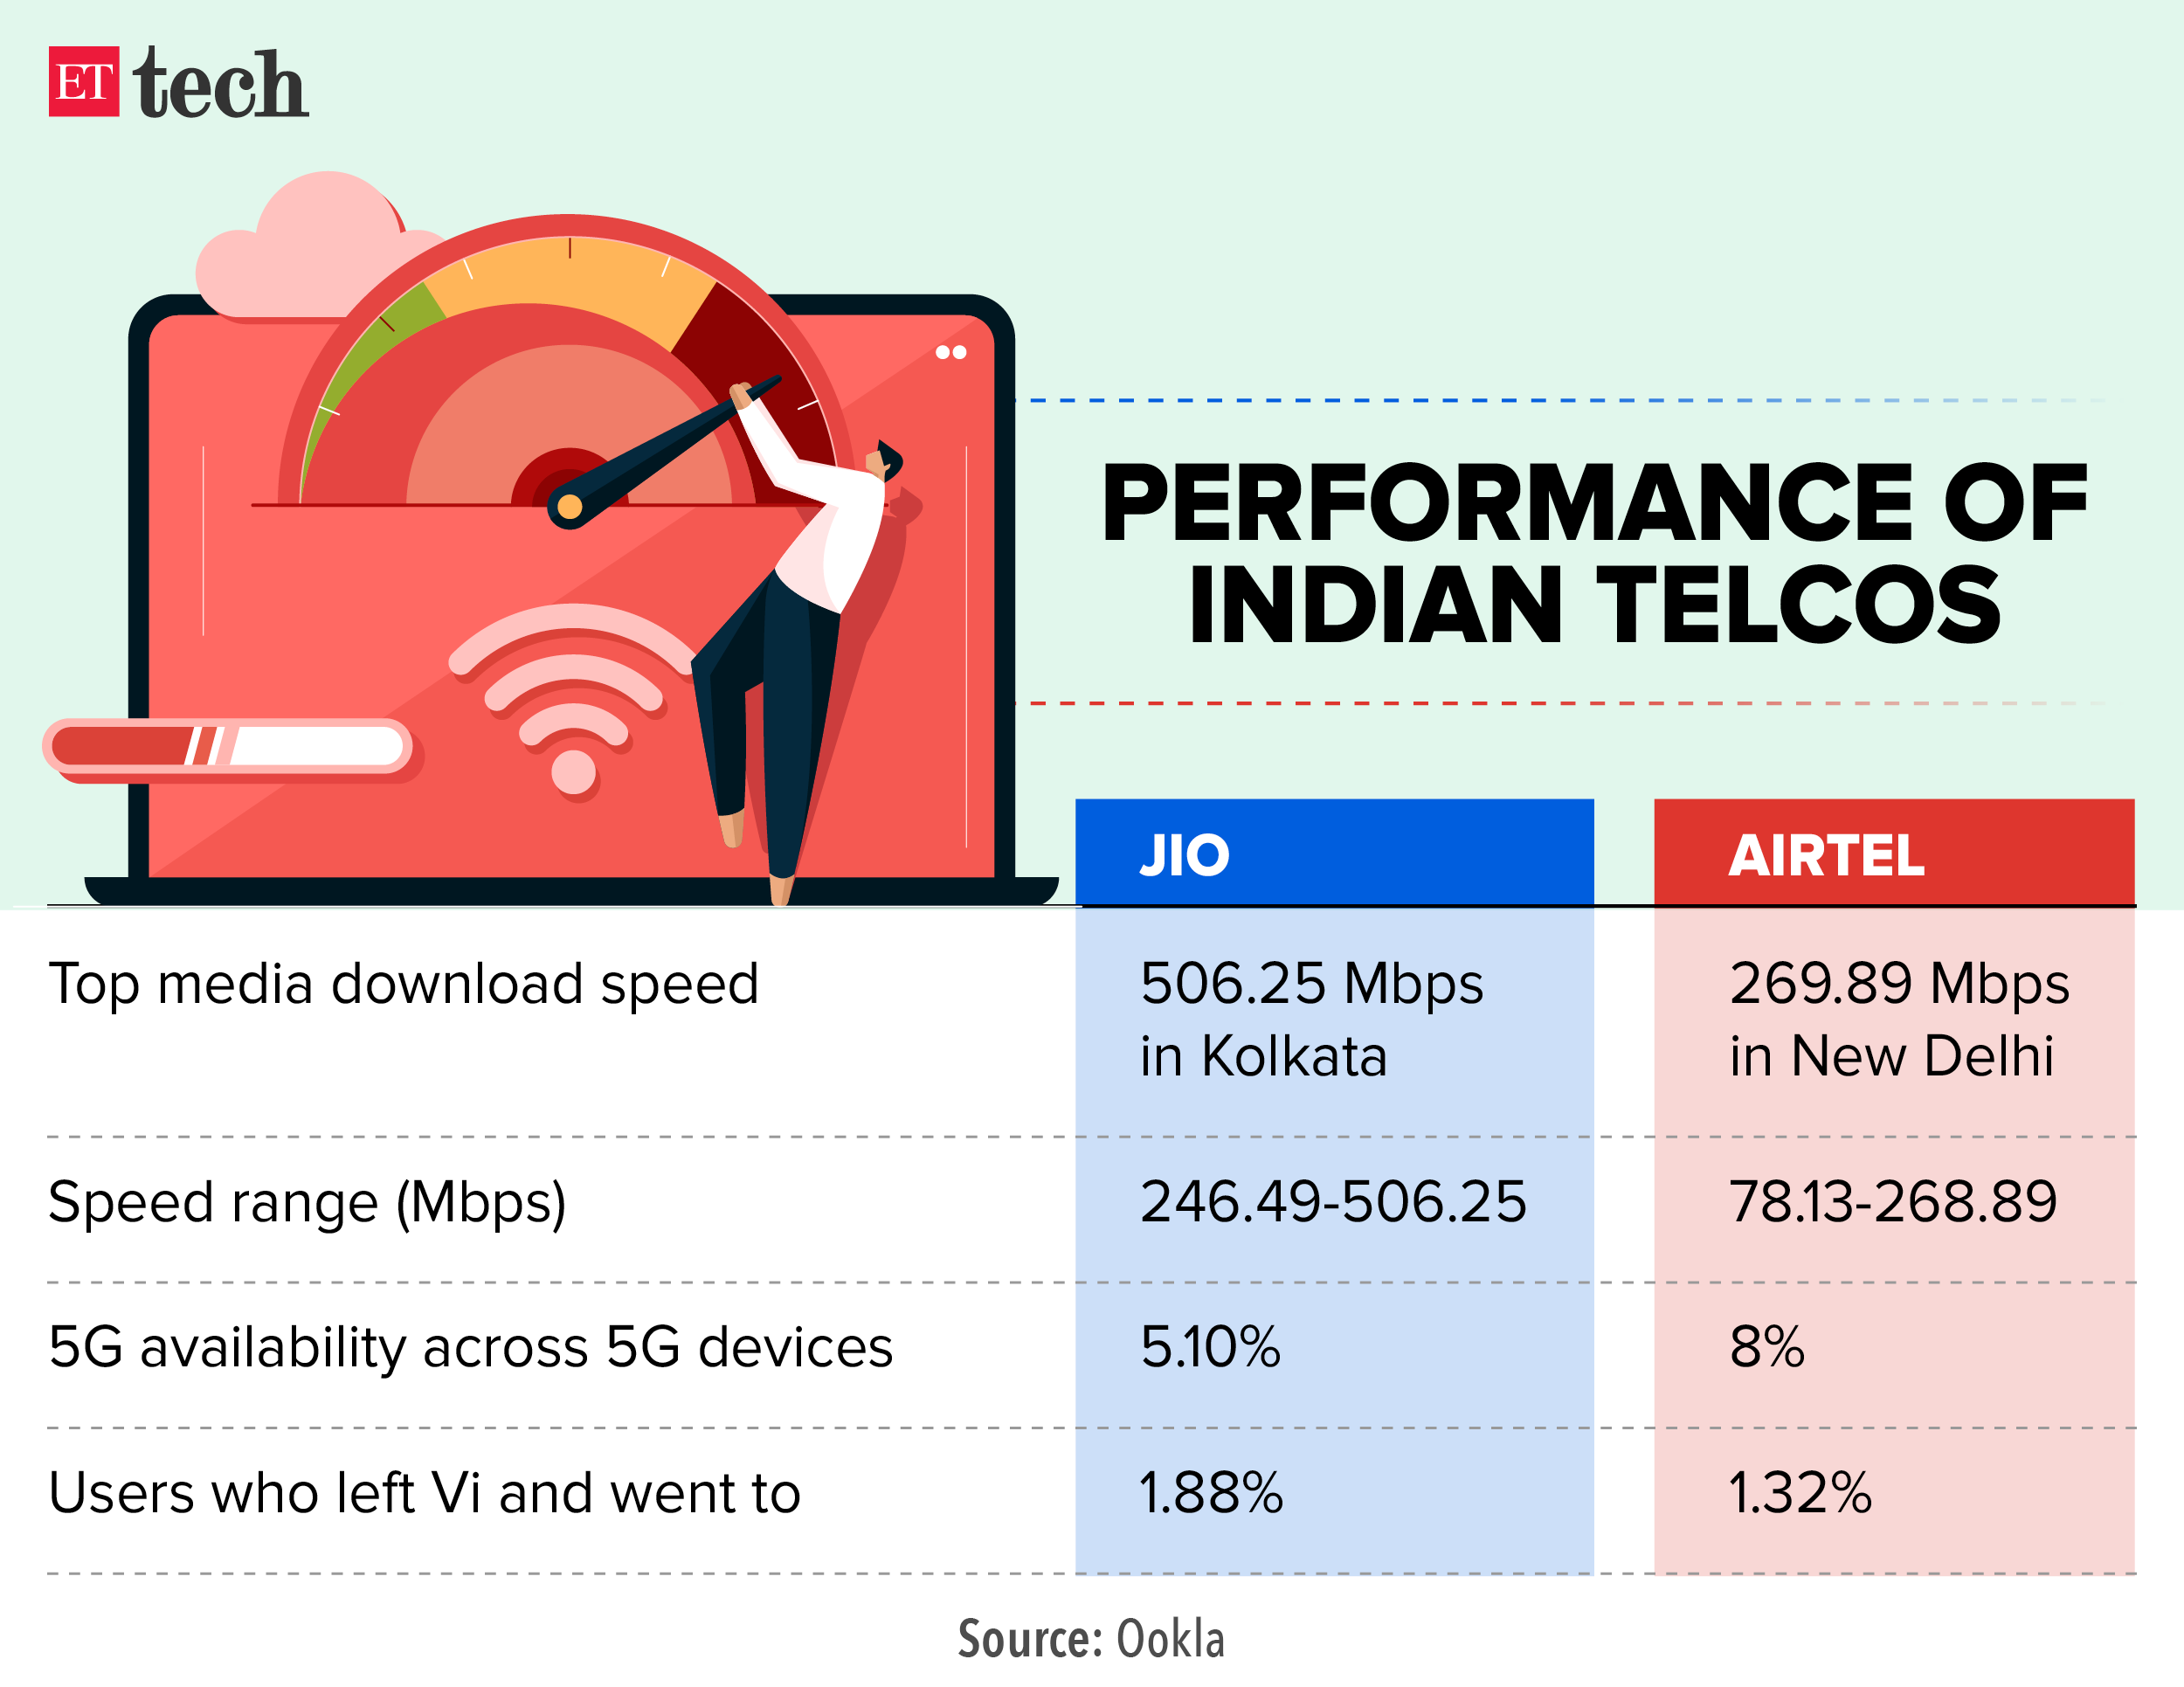 Performance of Indian telcos